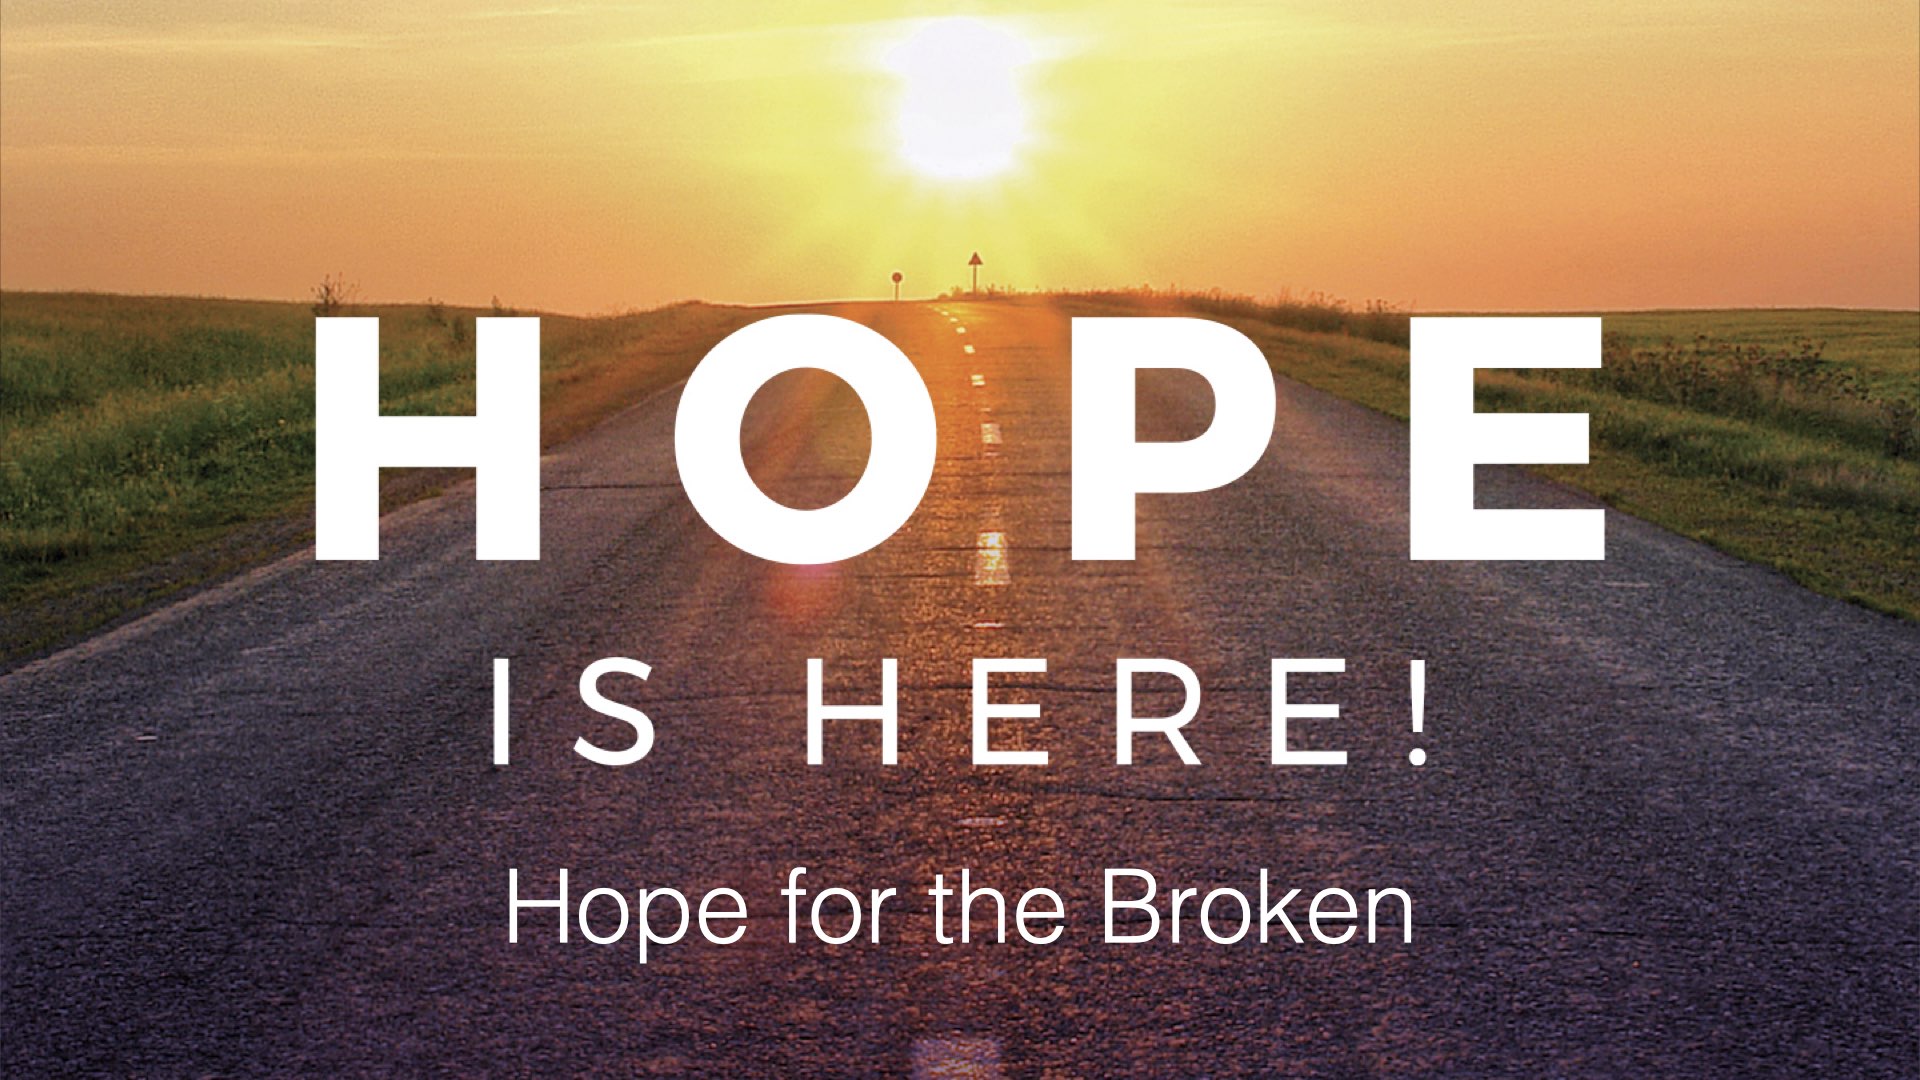 Hope for the Broken by Missy Grinnell